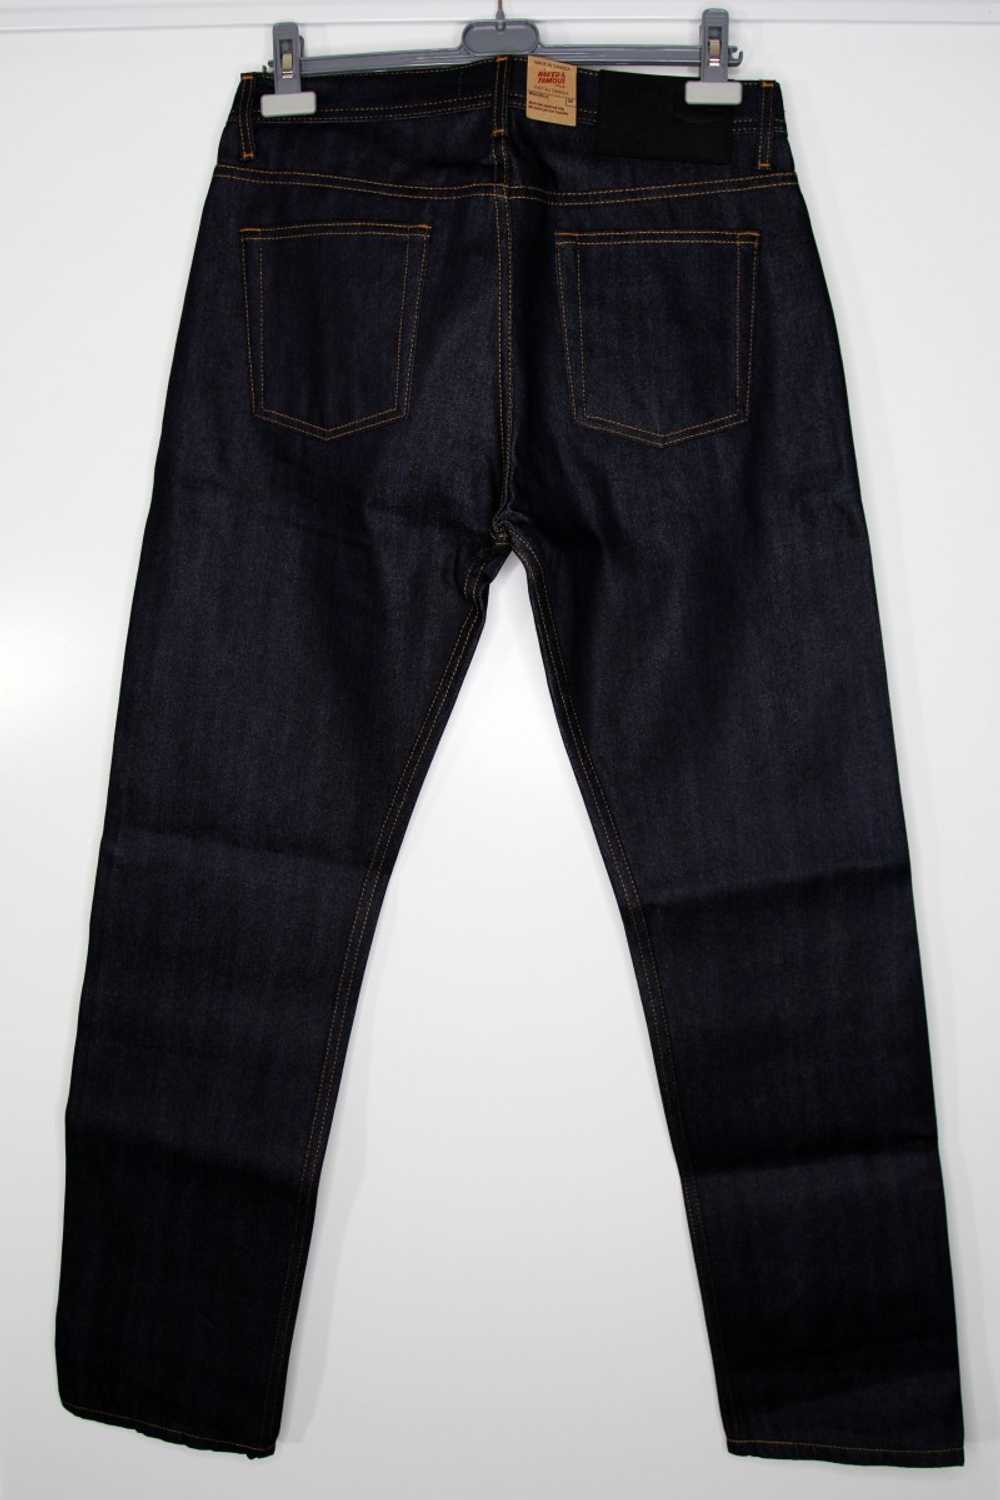 Naked & Famous - BNWT NAKED & FAMOUS WEIRD GUY AL… - image 2